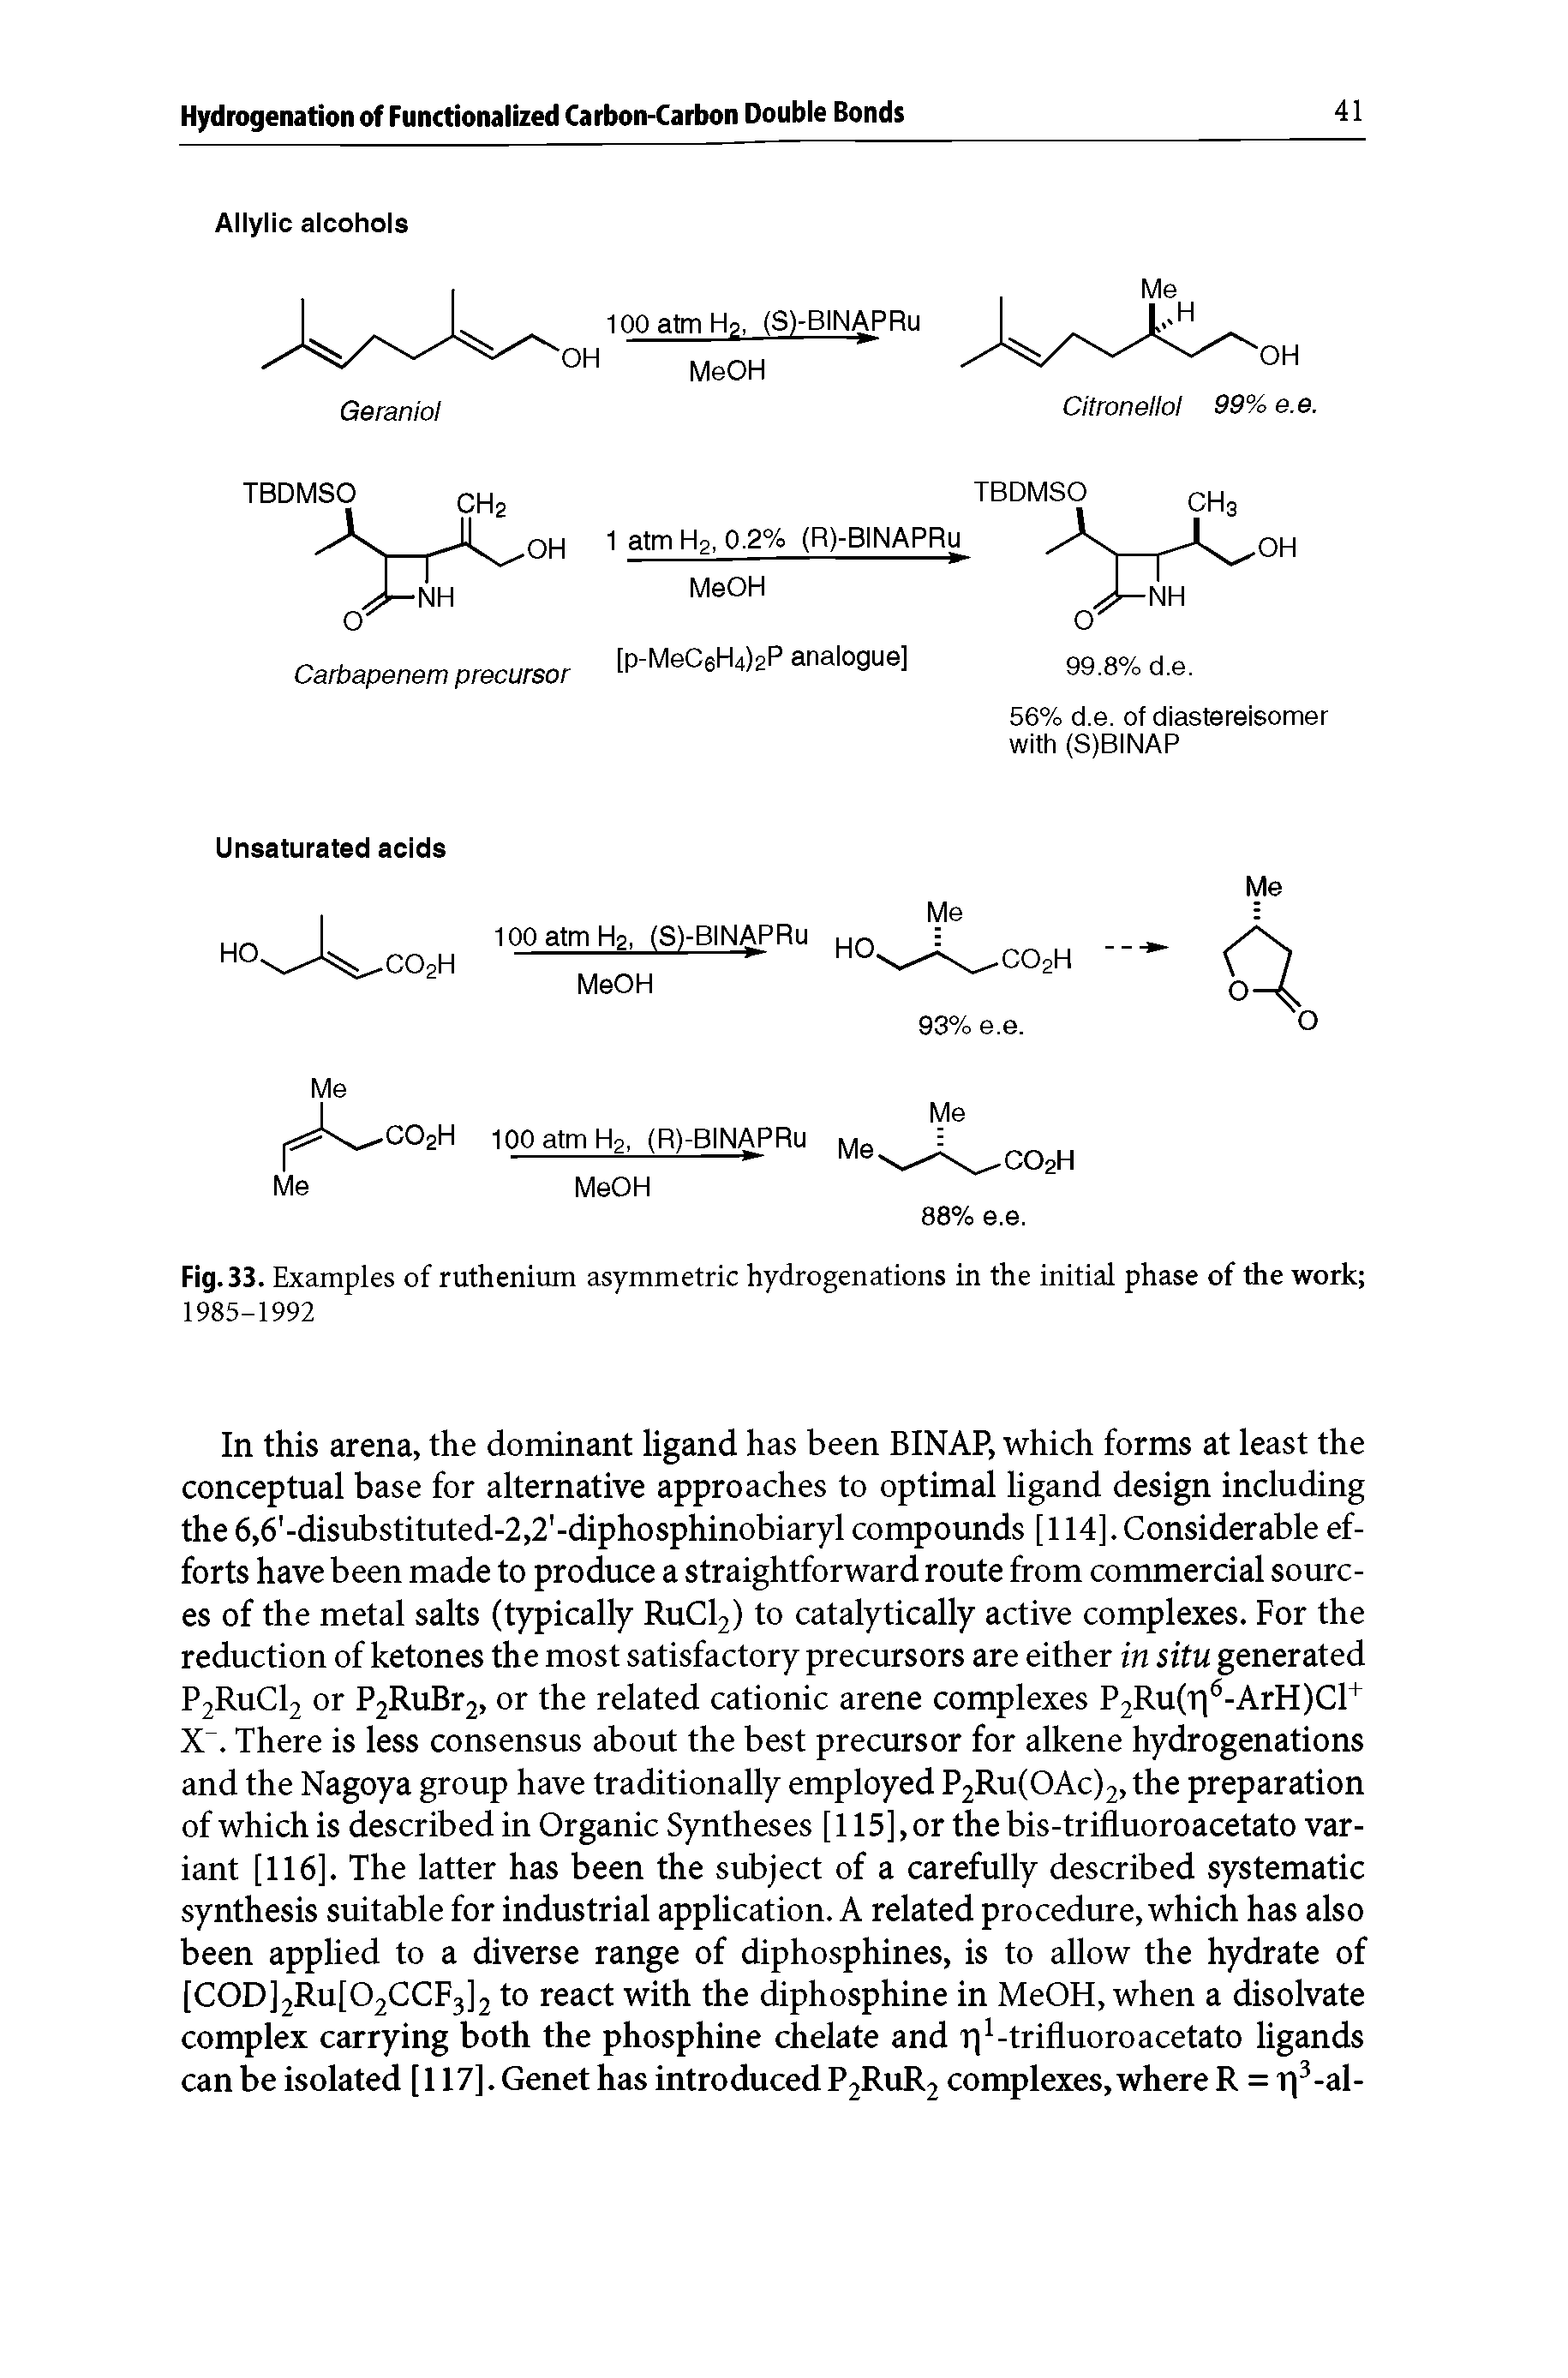 Fig. 33. Examples of ruthenium asymmetric hydrogenations in the initial phase of the work ...